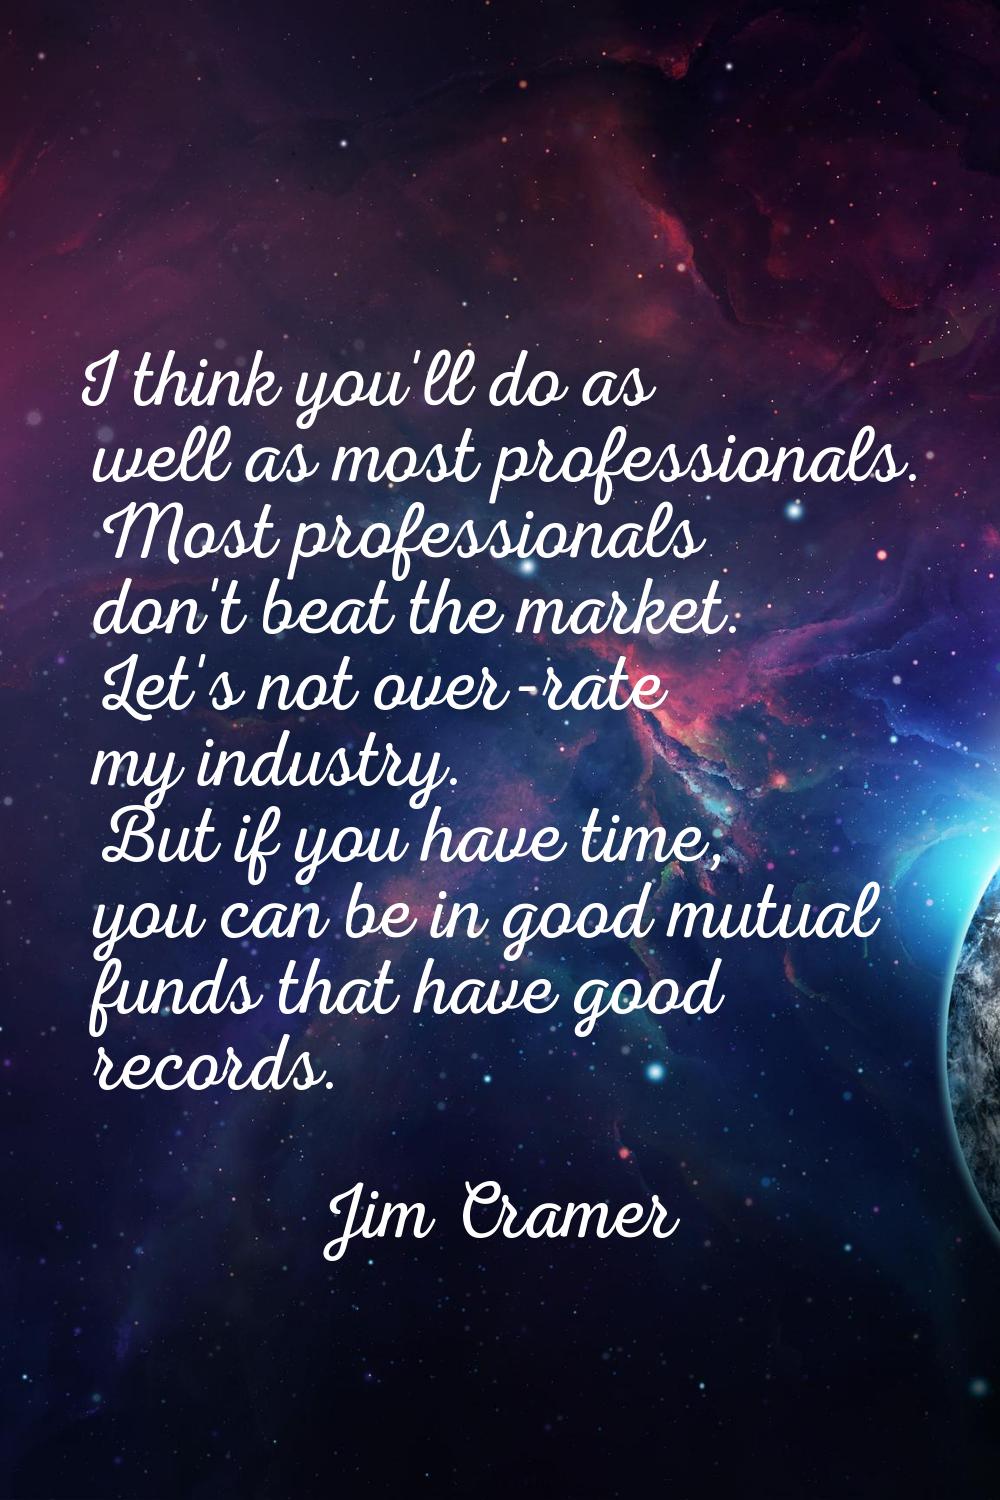 I think you'll do as well as most professionals. Most professionals don't beat the market. Let's no